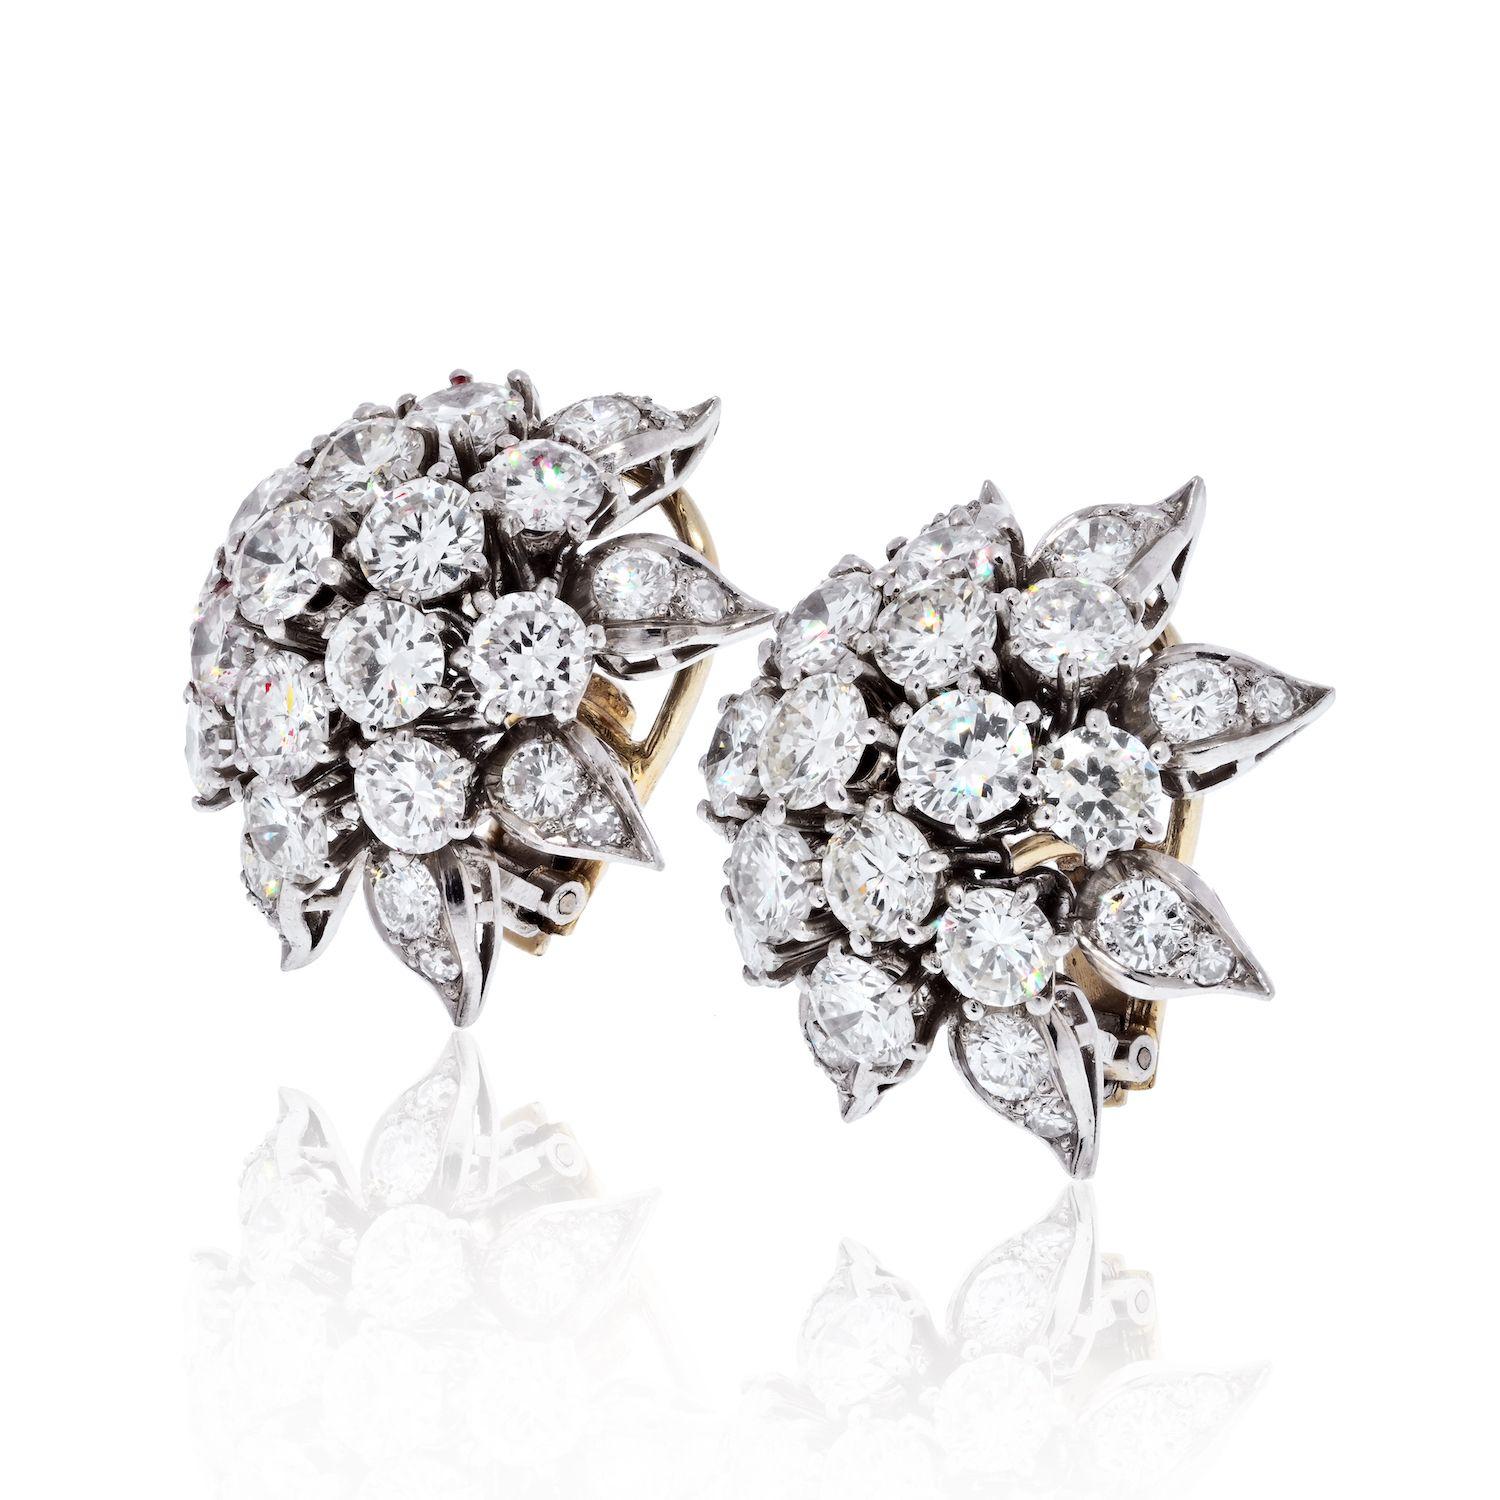 These estate cluster earrings are exquisite in every way. Round diamond burst cluster earrings in Platinum set with 12 carats of diamonds.
24mm wide. 
Diamond quality G-H color, VS-SI clarity.
Heavy omega backing for non-pierced ears. 